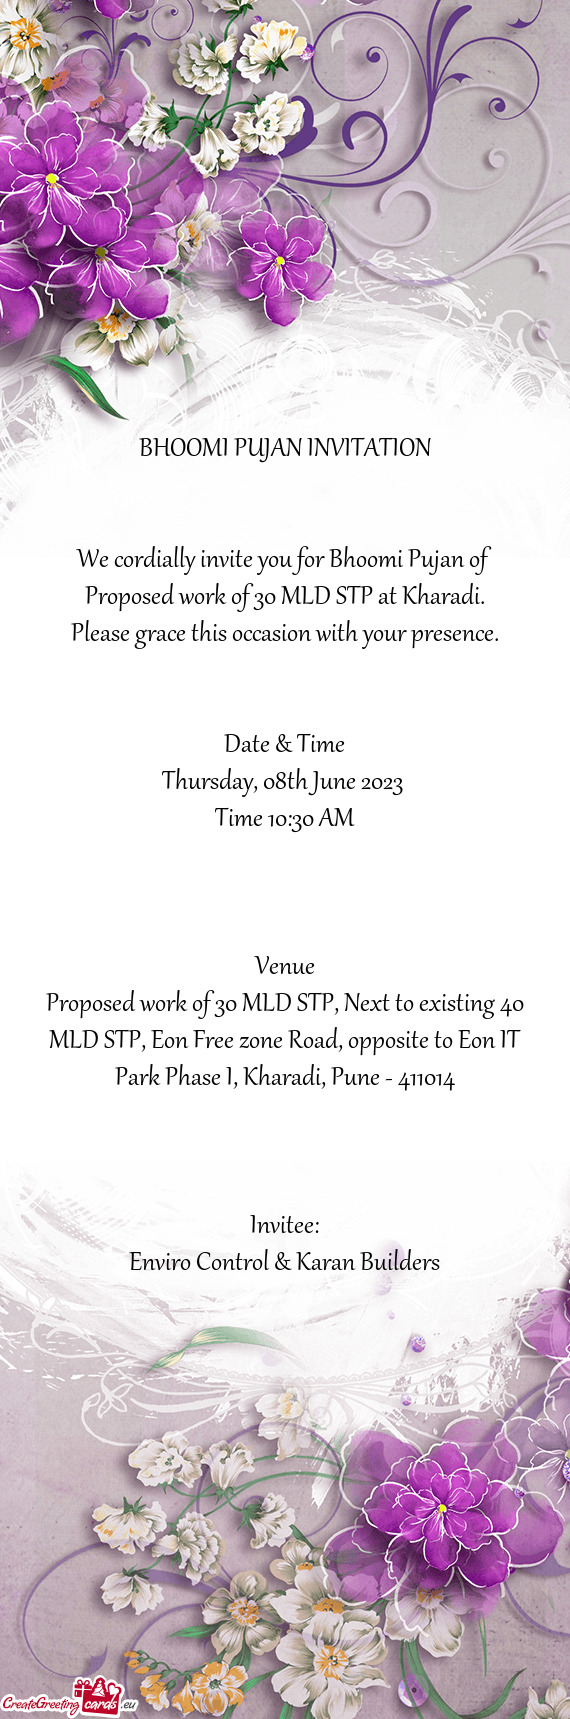 We cordially invite you for Bhoomi Pujan of Proposed work of 30 MLD STP at Kharadi